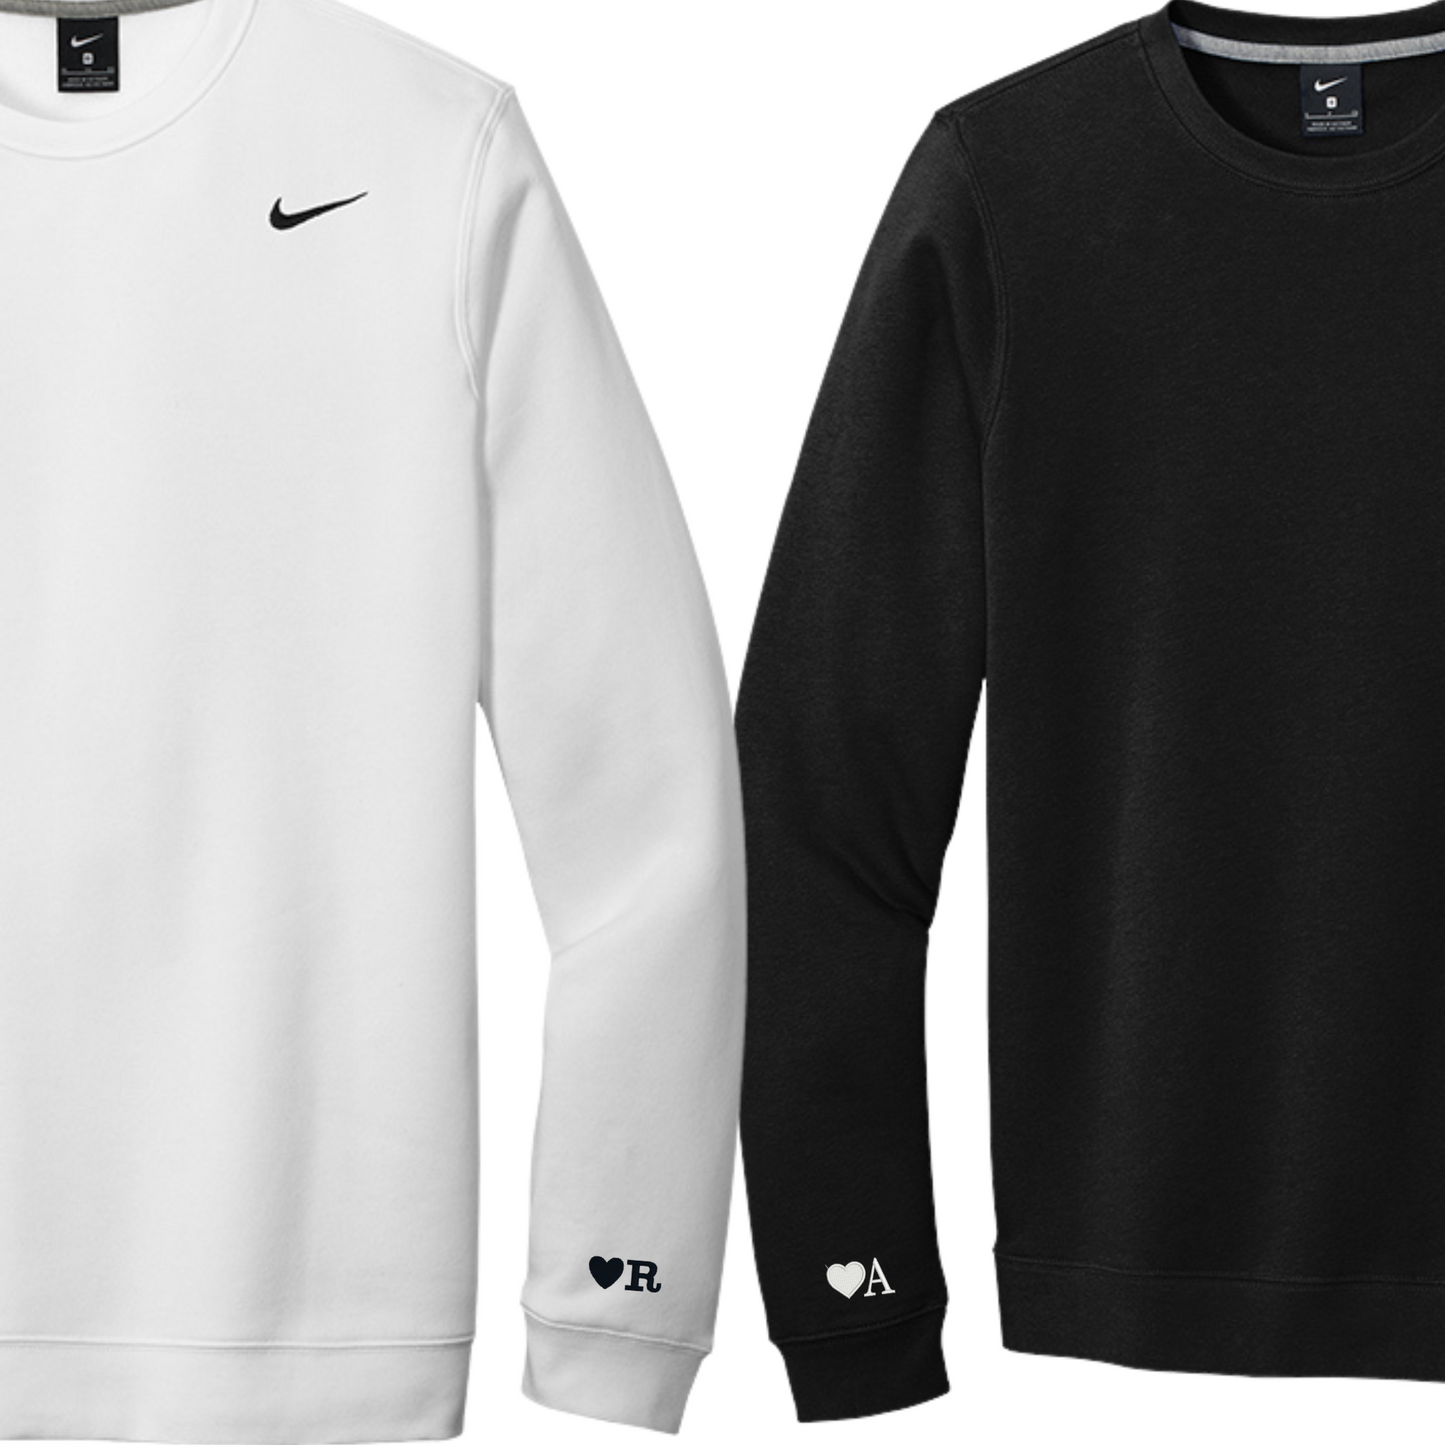 Nike Graduation gift Embroidered crewneck sweatshirt with "class of 2023" in Roman numerals,